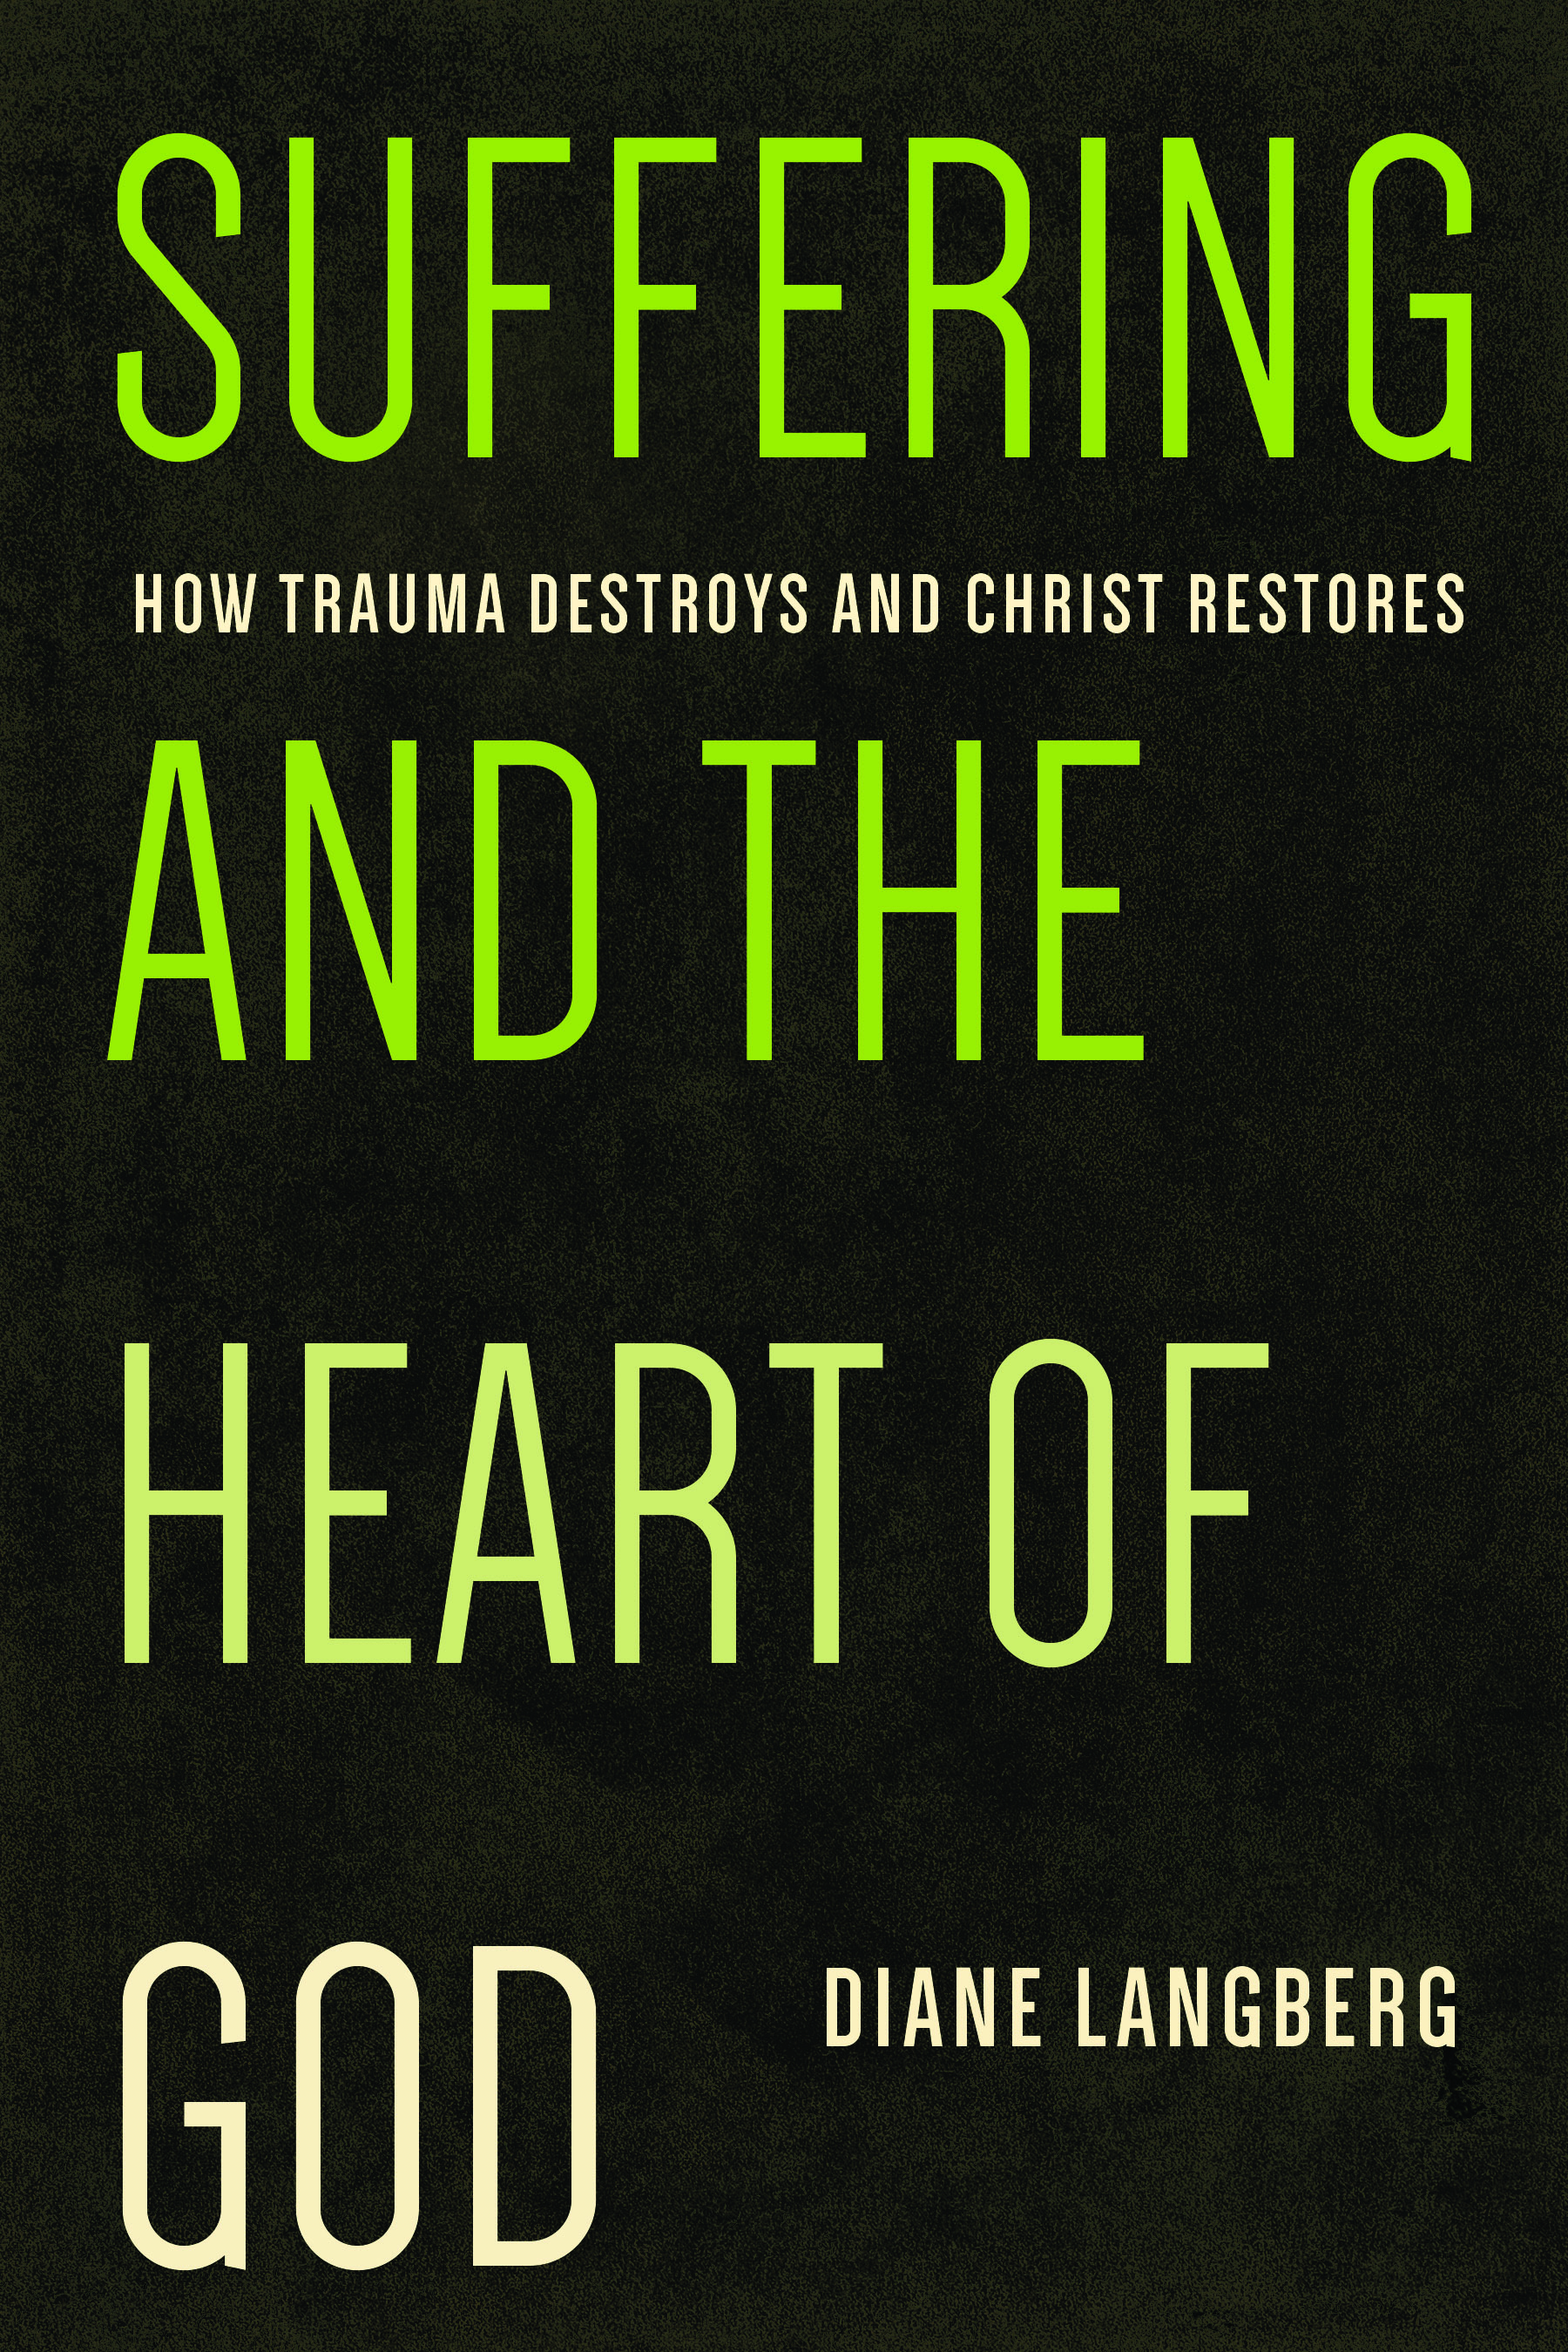 Suffering and the Heart of God